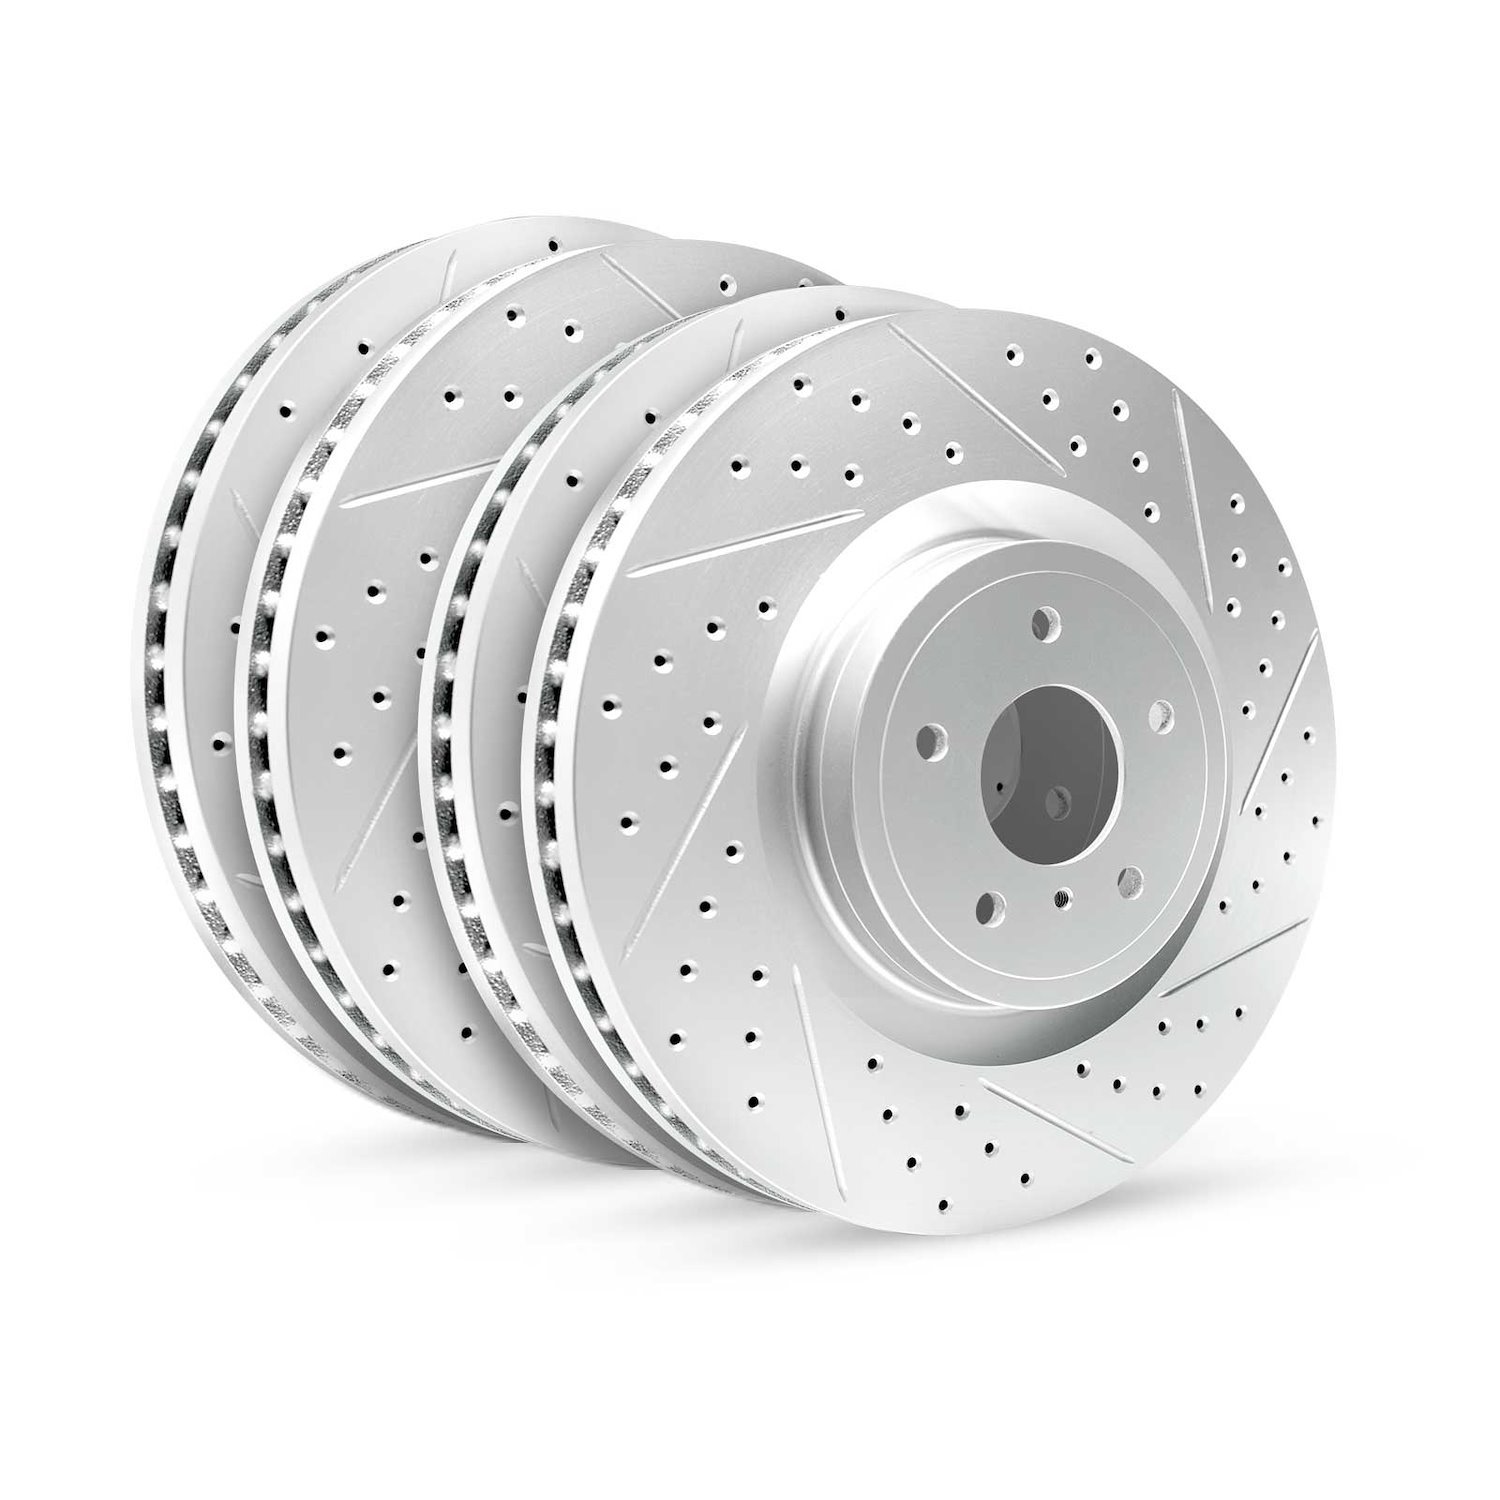 GEO-Carbon Drilled/Slotted Rotors, 1979-1985 Mercedes-Benz, Position: Front/Rear